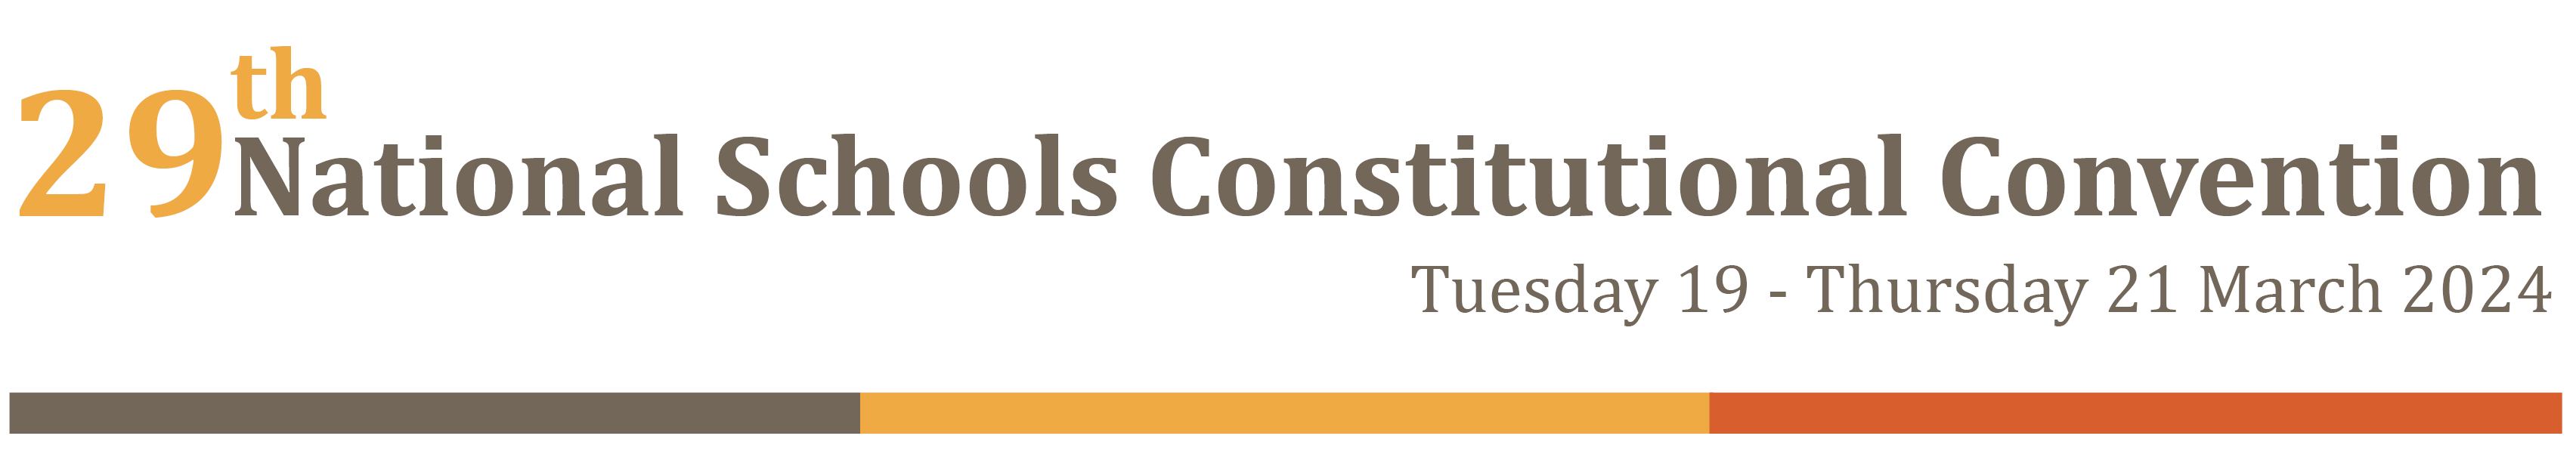 29th National Schools Constitutional Convention